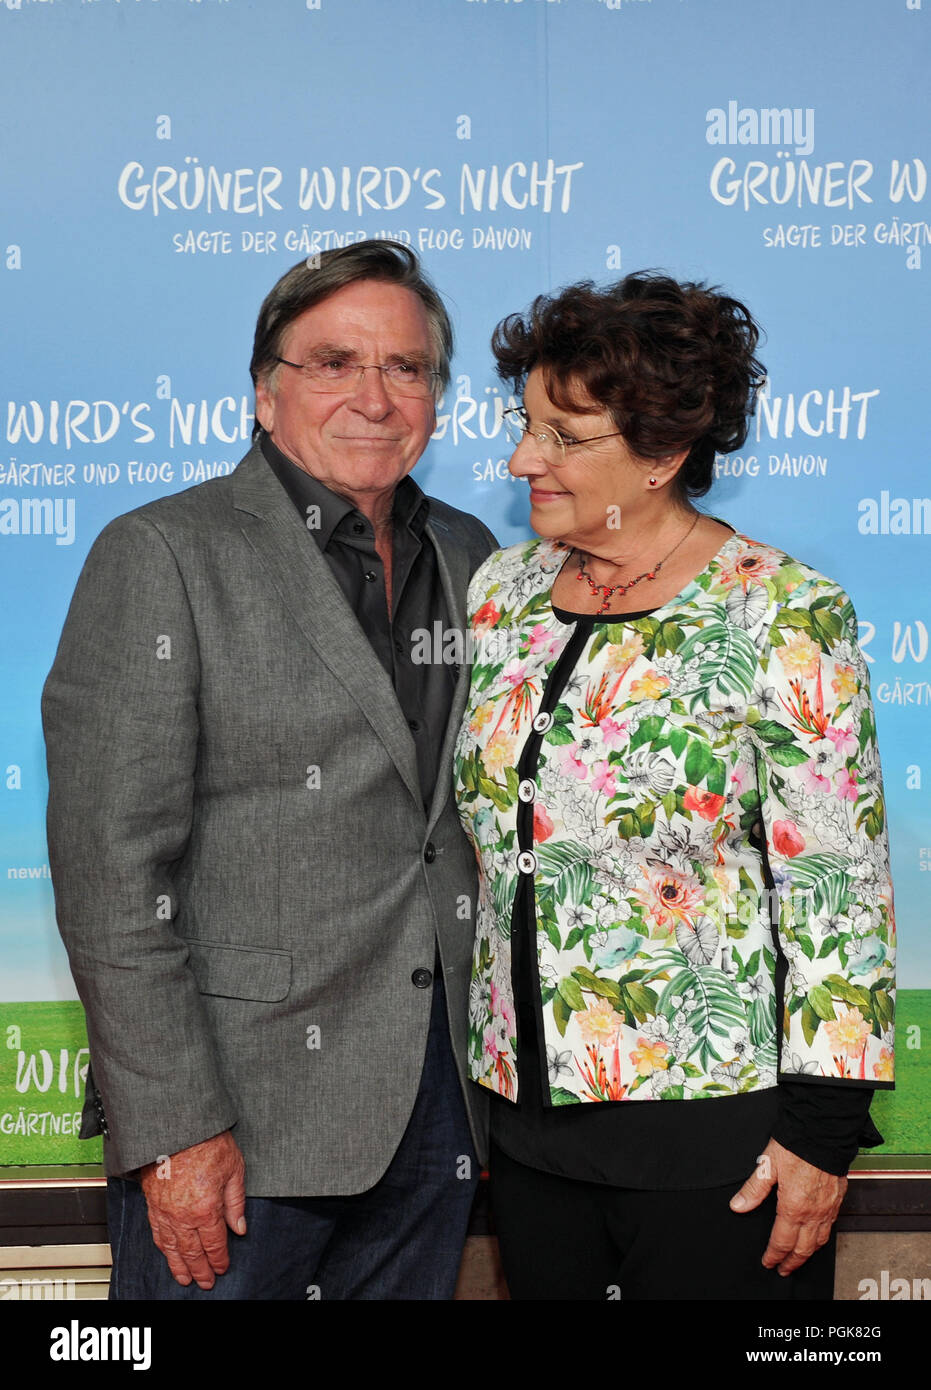 Munich, Germany. 27th Aug, 2018. The actors Elmar Wepper and Monika Baumgartner (they play a married couple) come to the premiere of their film 'Grüner wird's nicht, said the gardener and flew away'. The comedy will be released on August 30, 2018. Credit: Ursula Düren/dpa/Alamy Live News Stock Photo